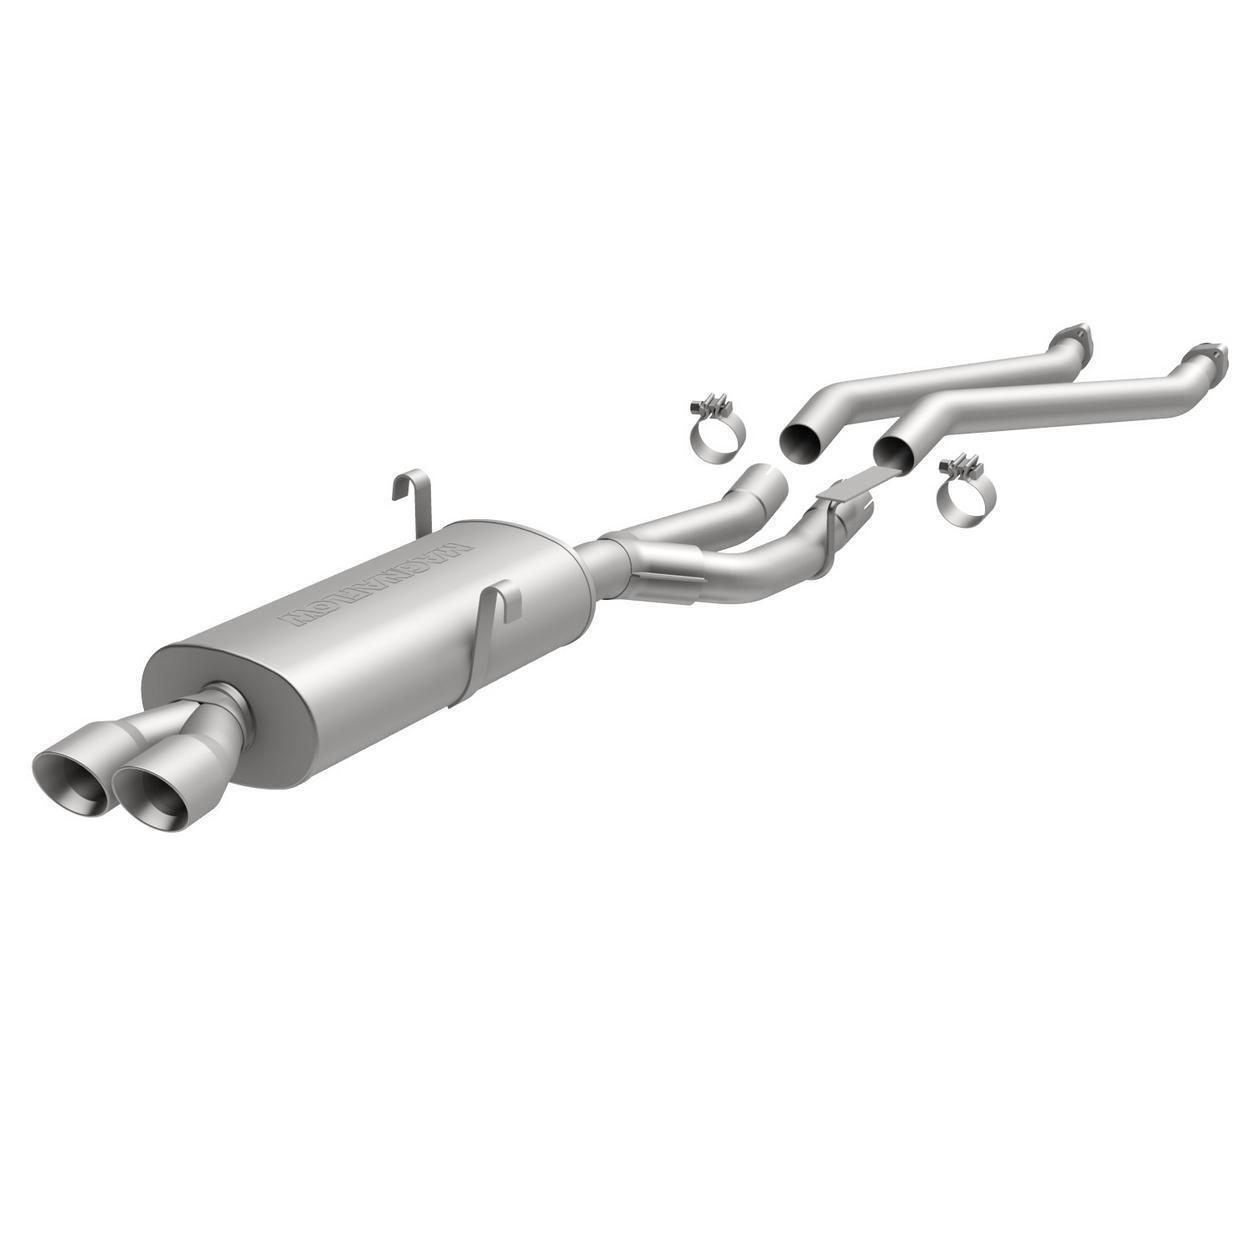 MagnaFlow Exhaust System Kit - Fits: 1987-1991 Bmw 325i, 1987-1991 Bmw 325is, 19